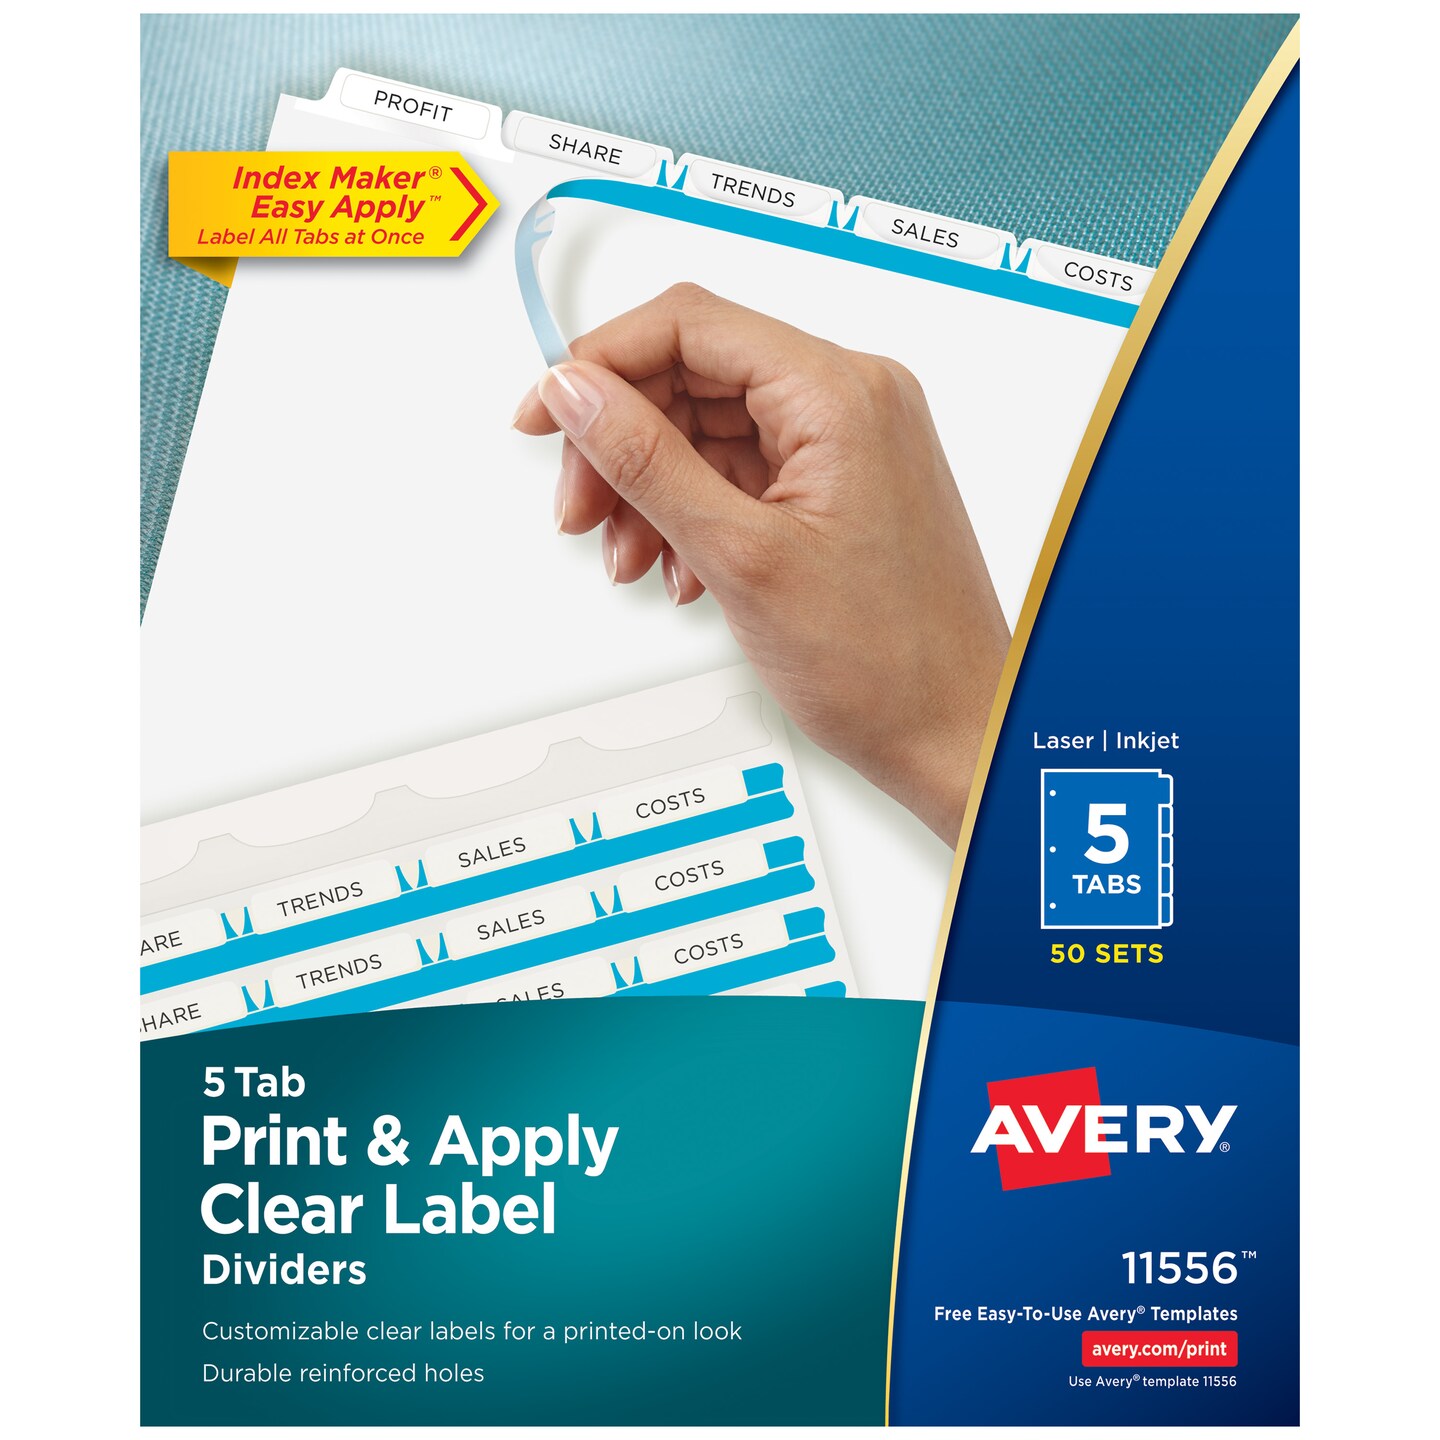 Avery 5 Tab Dividers for 3 Ring Binder, Easy Print &#x26; Apply Clear Label Strip, Index Maker Customizable White Tabs, 50 Sets (11556)